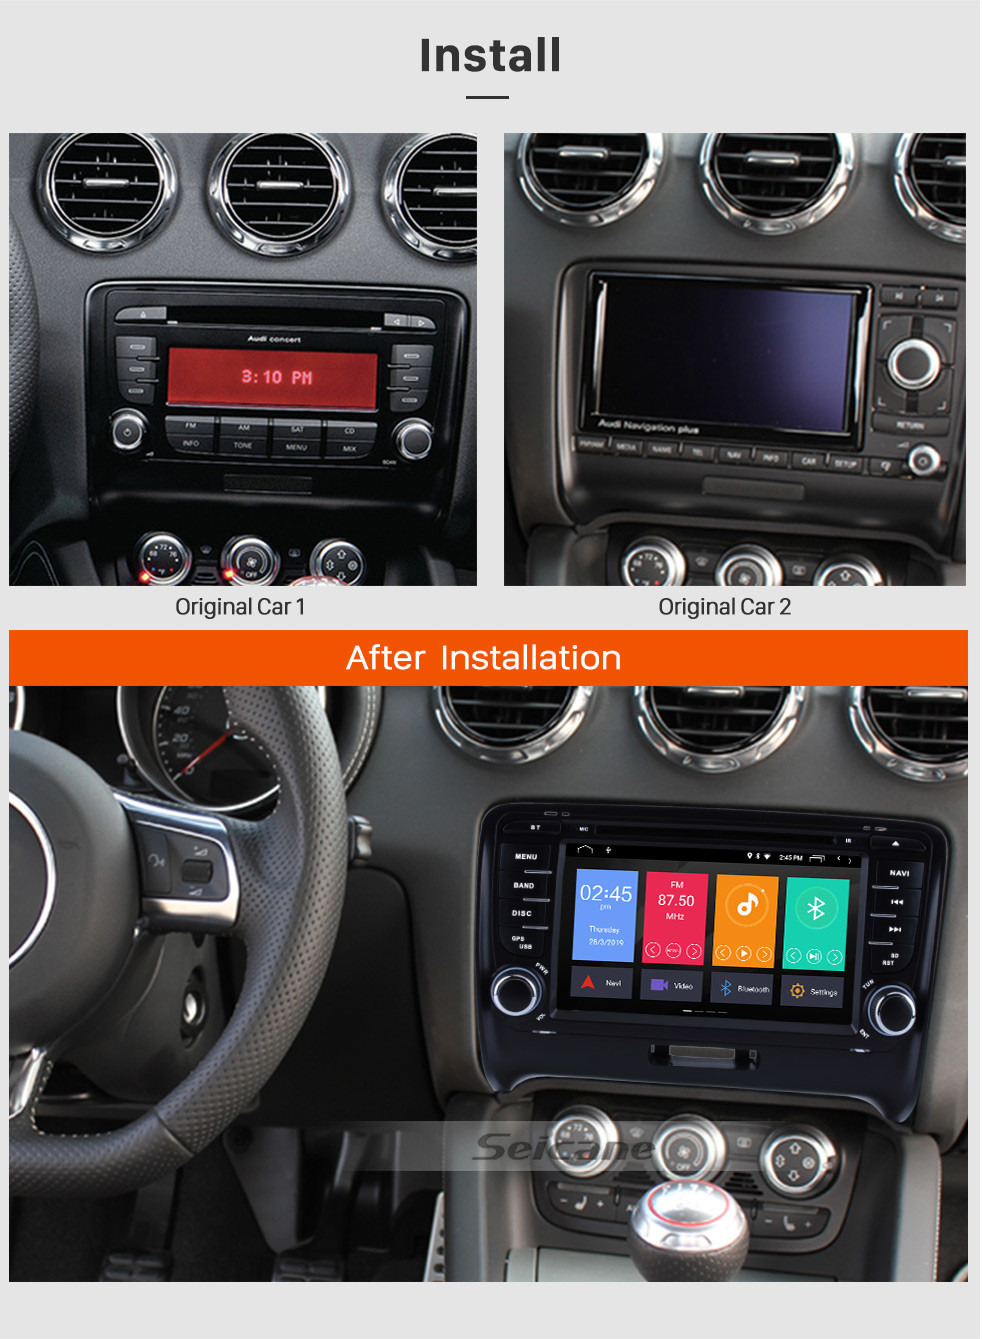 Seicane OEM Android 10.0 2006-2013 Audi TT Radio Replacement with HD 1024*600 Multi-touch Capacitive Screen Sat Nav Car Audio System 4G WiFi Bluetooth Music CD DVD Player AUX HD 1080P Video Backup Camera